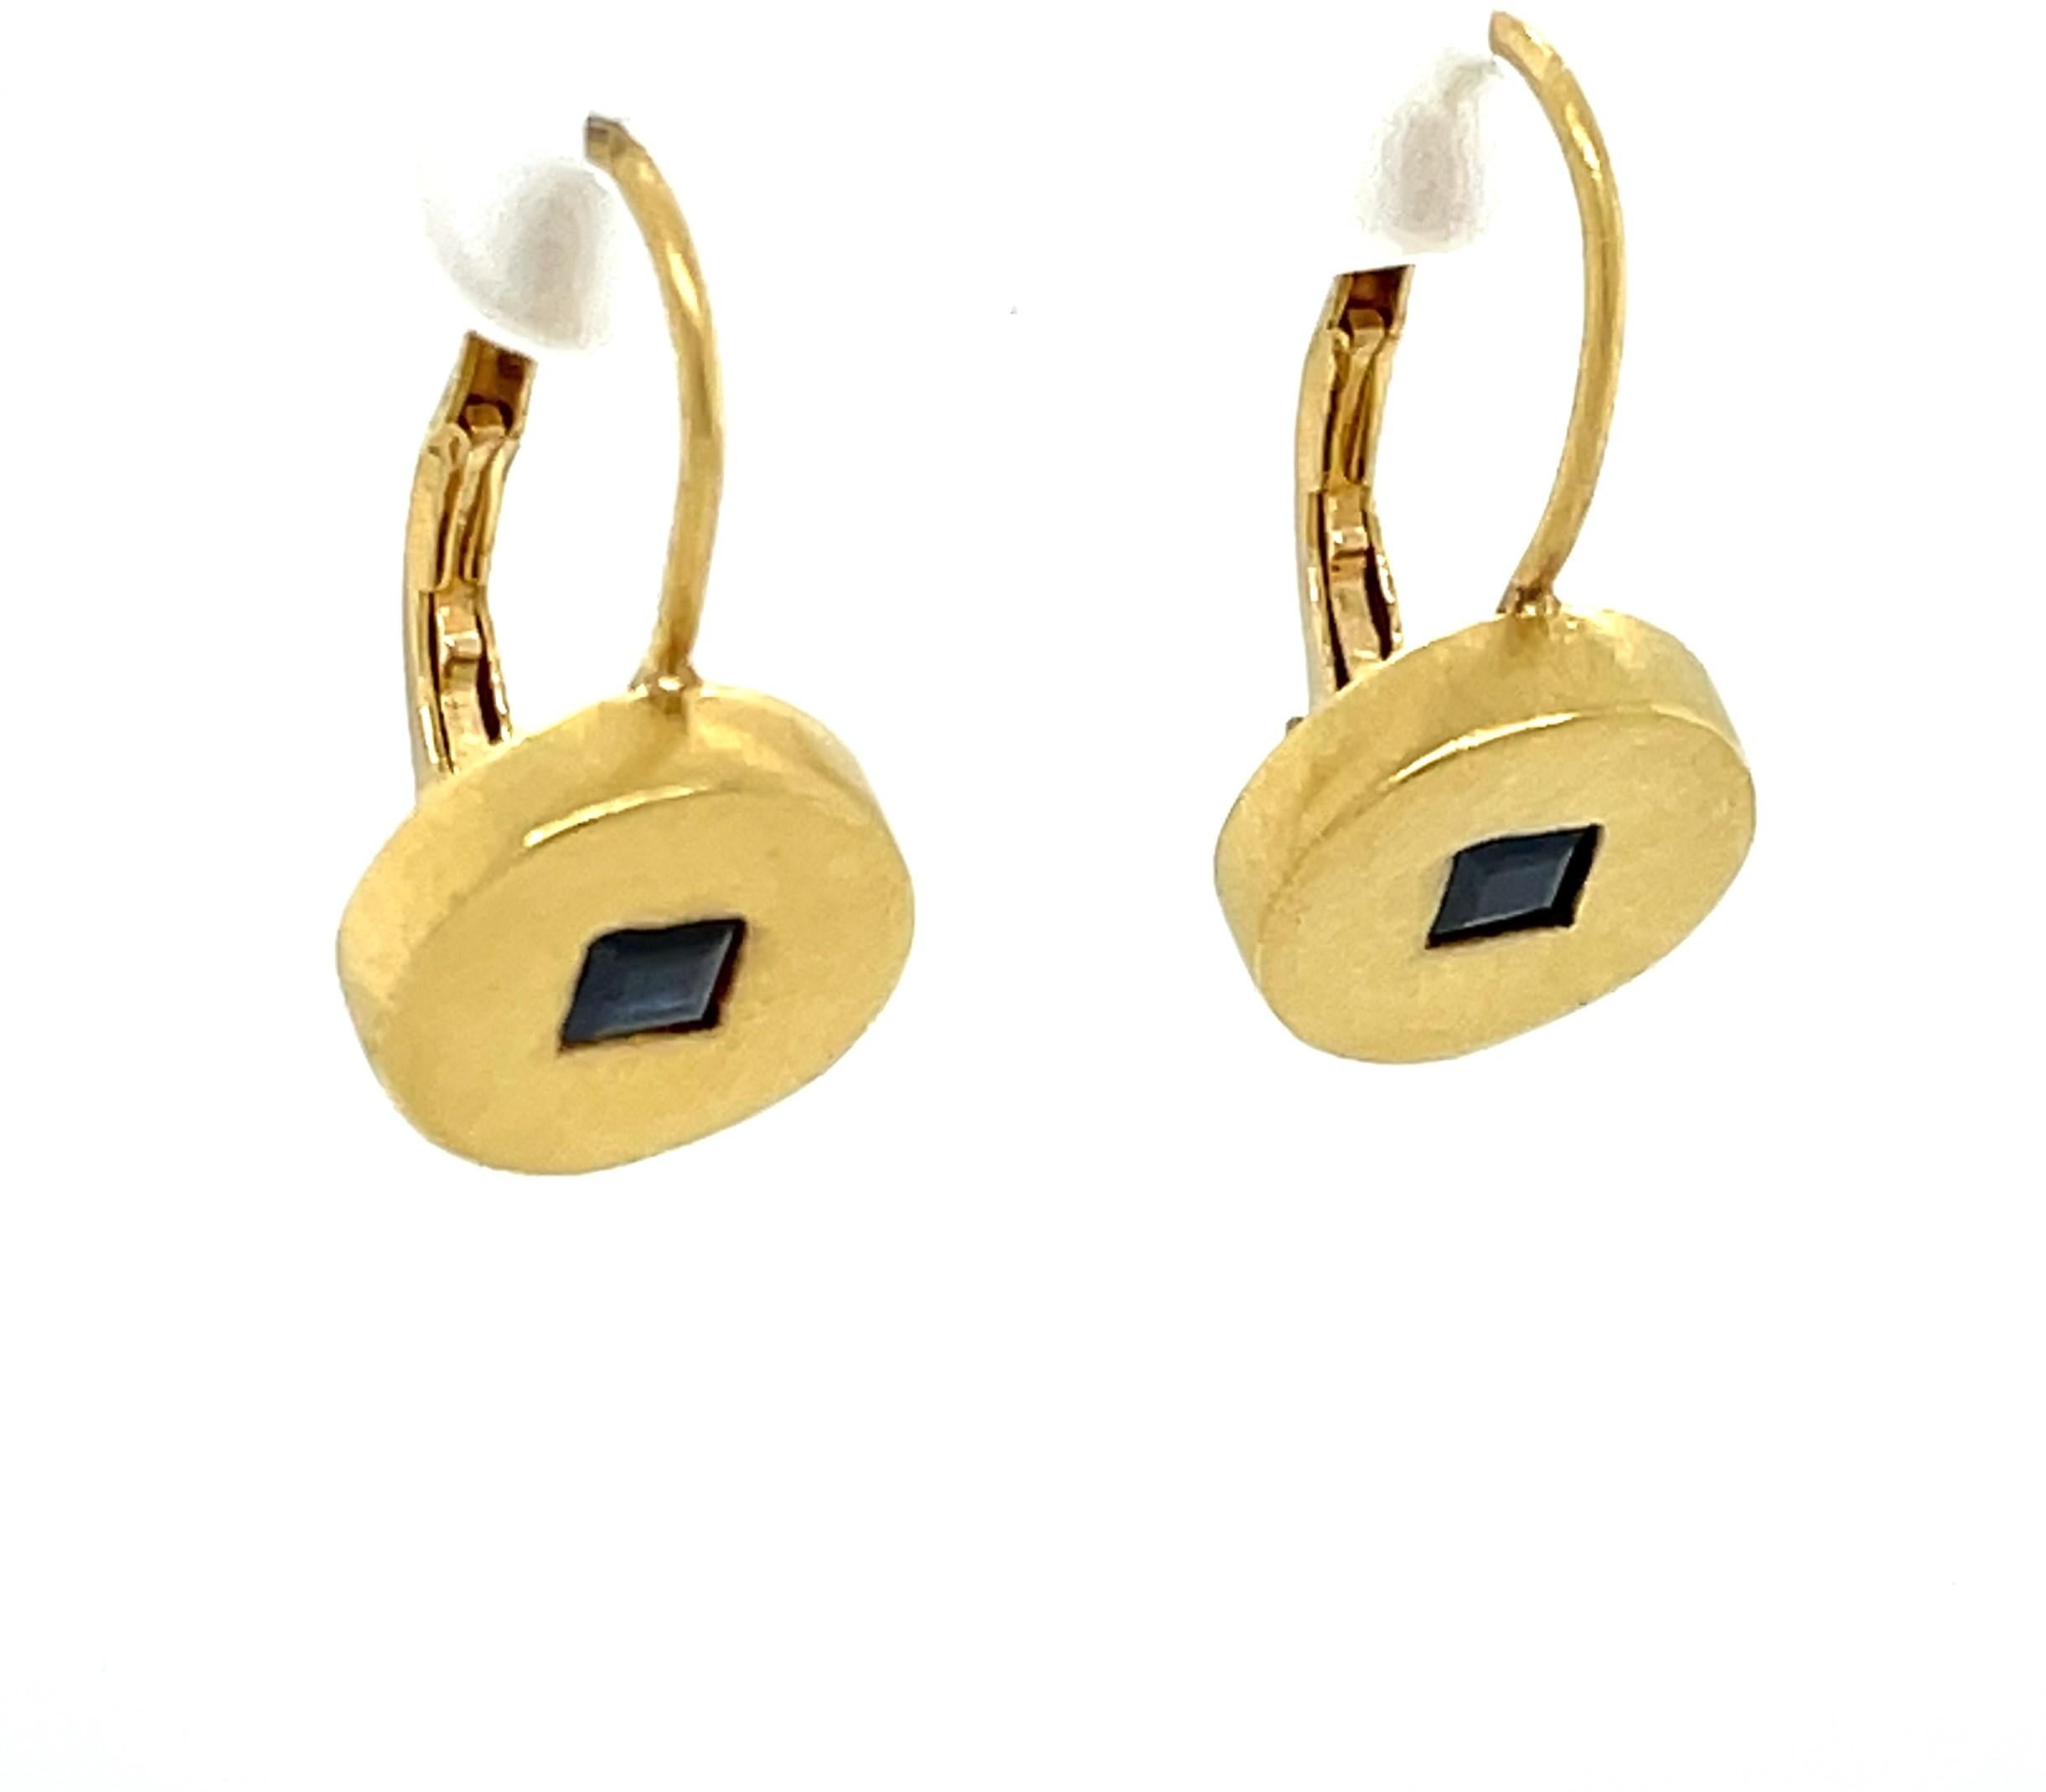 Understated, 3/8 inch round satin finished 18 karat yellow old drop earrings, each with a .15 carat emerald cut blue sapphire center accent, 30 carat total weight and a 5/8 inch drop. Simple sophistication by design from the late New York Jewelry